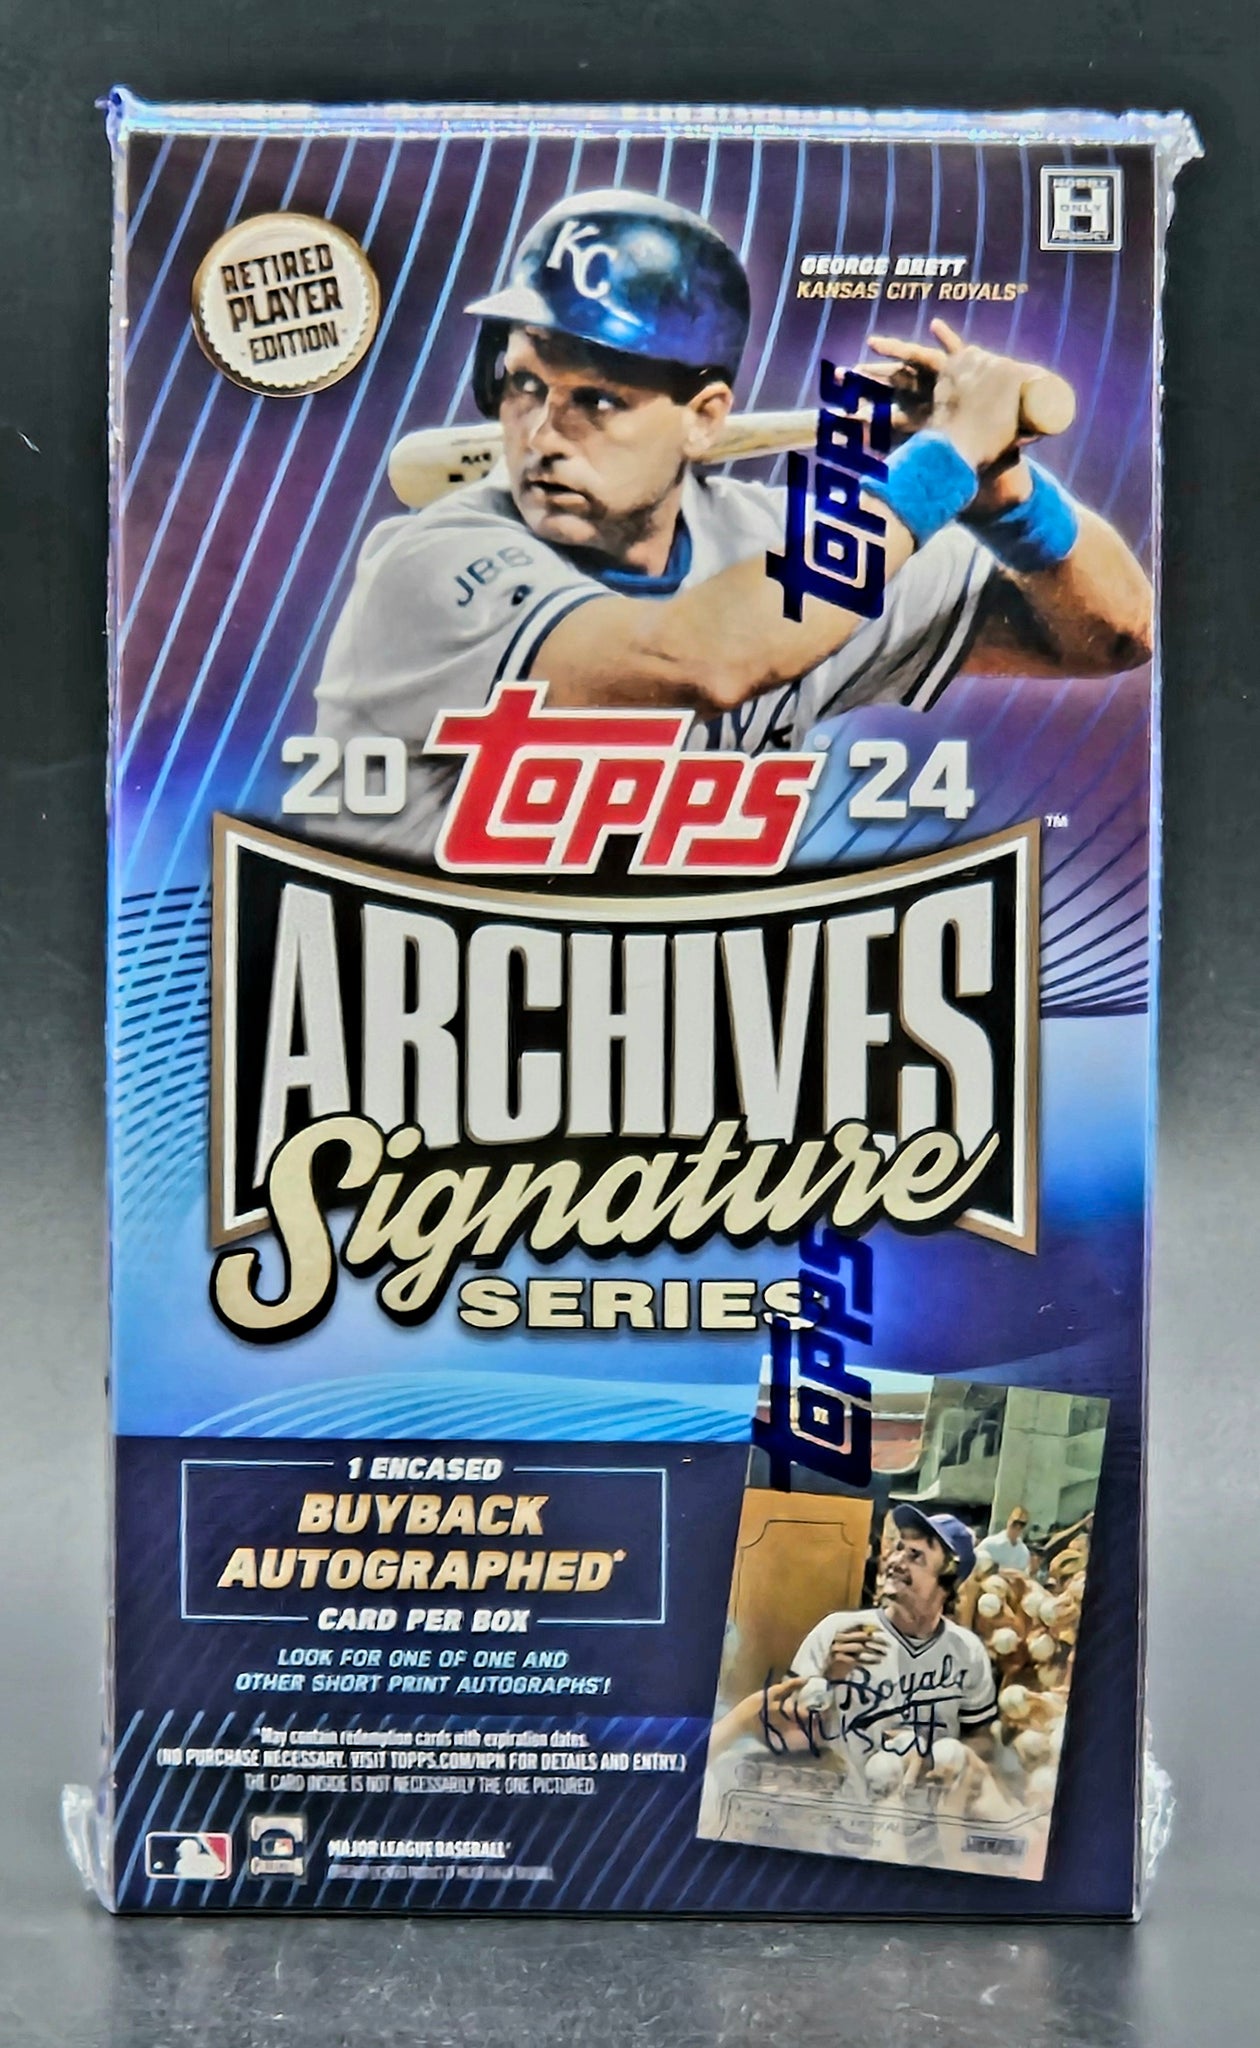 2024 Topps Archives Signature Series Retired Player Edition Baseball Box